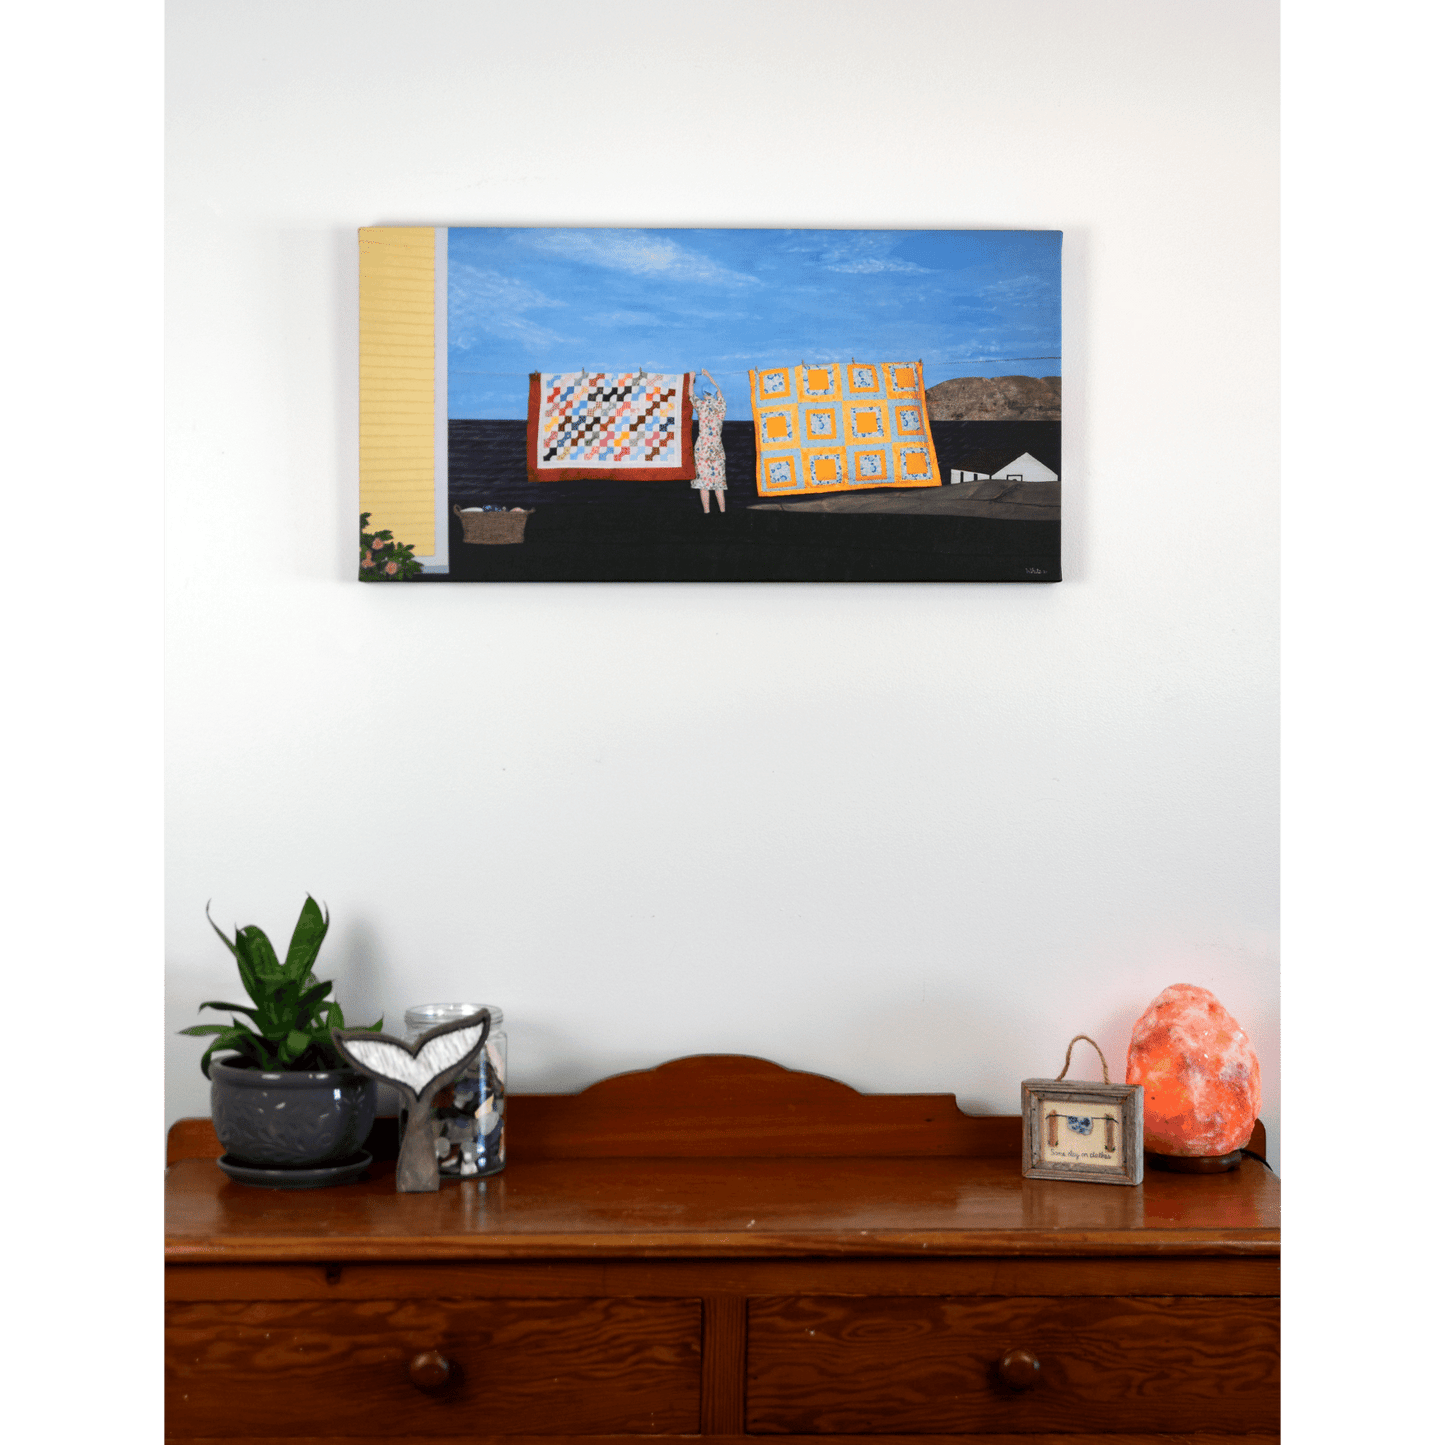 "Quilts" canvas print features a woman in a yellow dress hanging quilts with the ocean and Twillingate coast in the background.